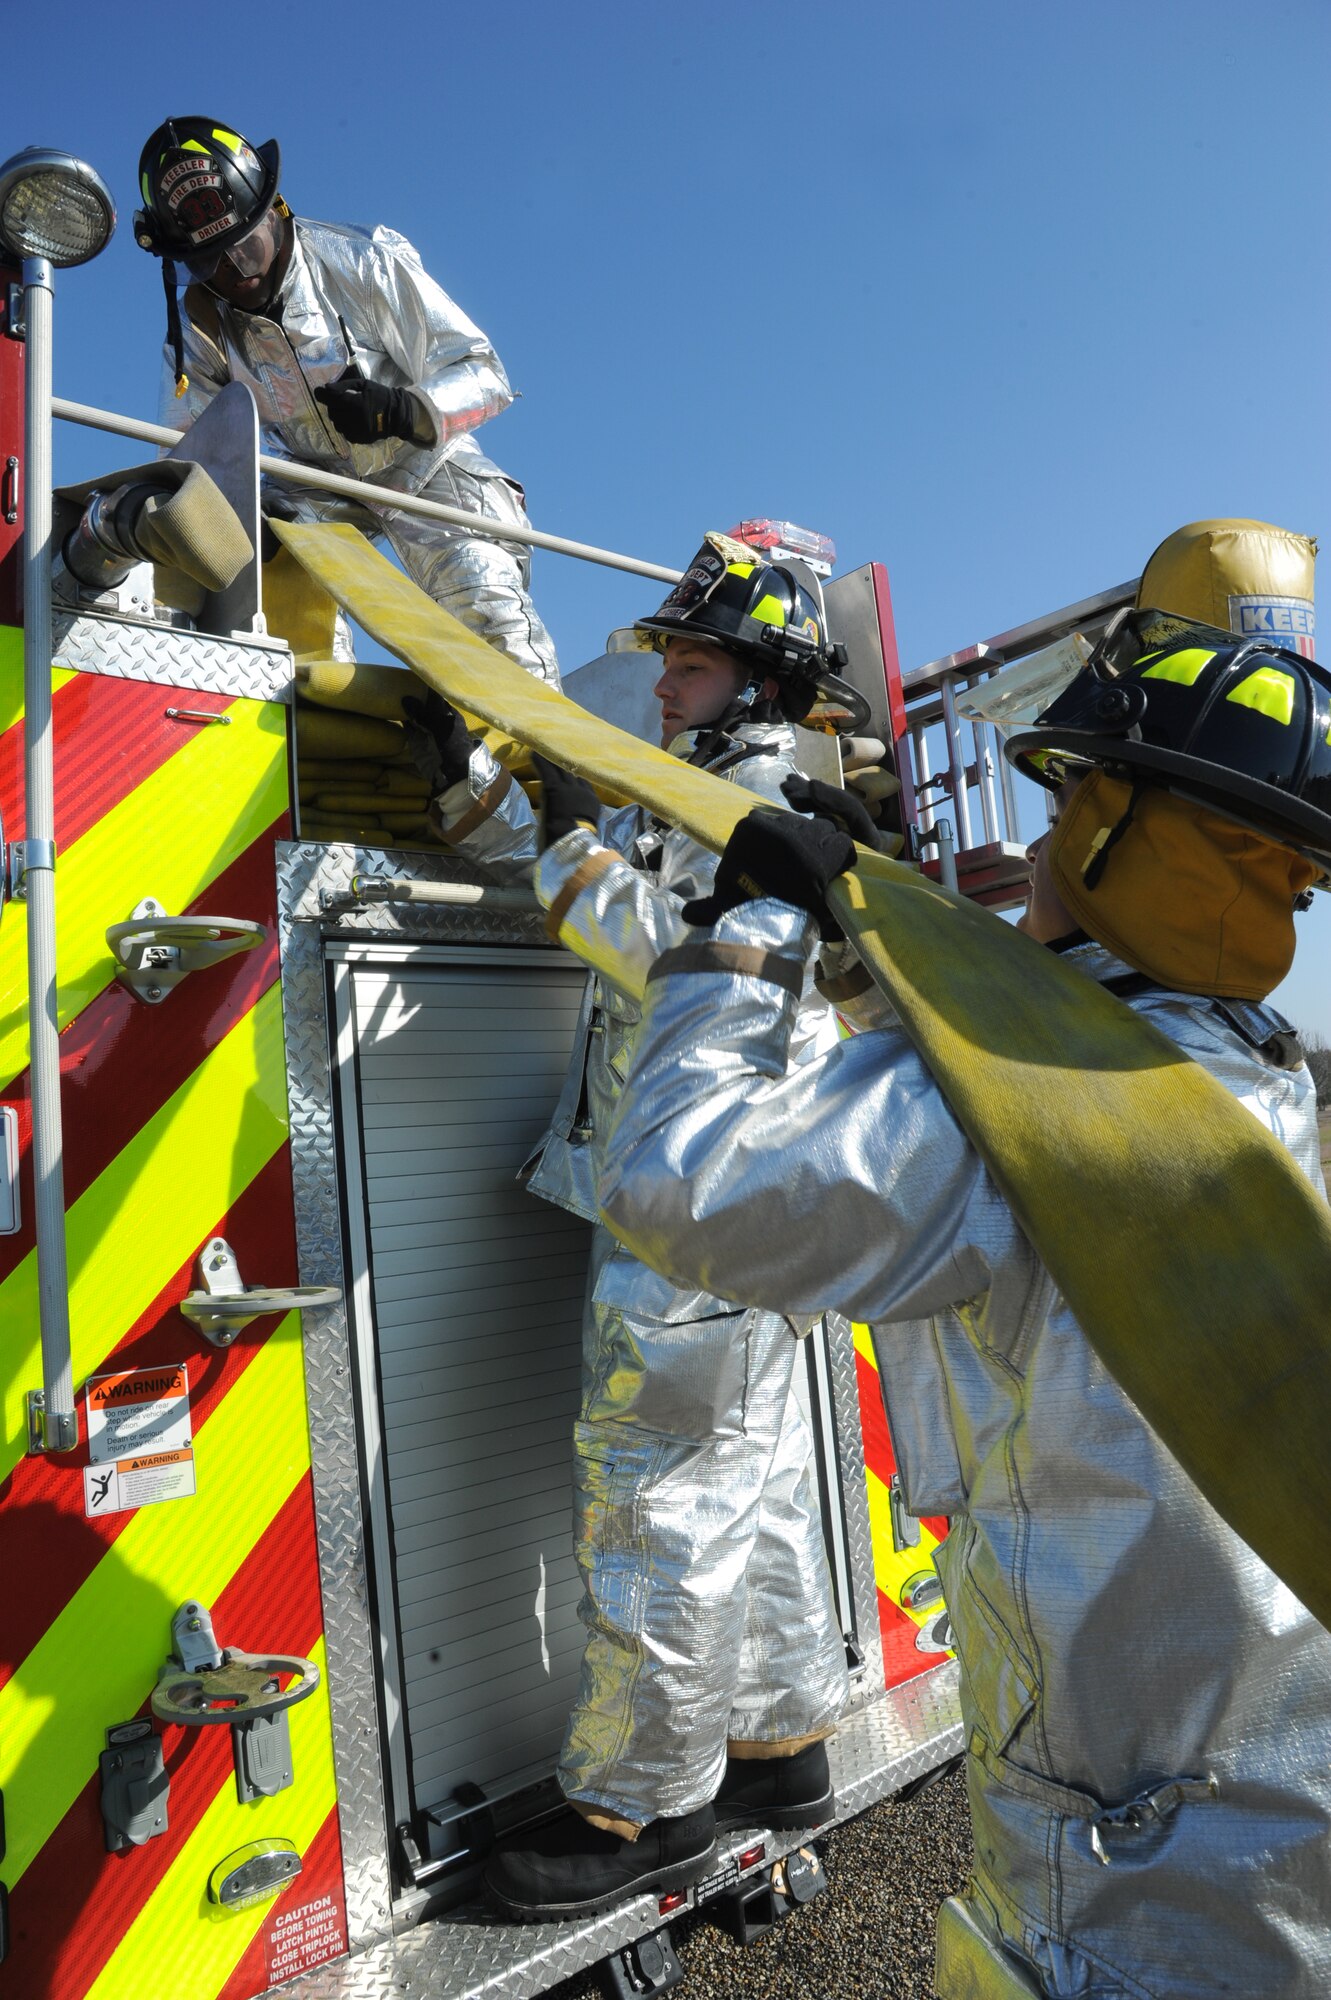 Senior Airman Jeffery Spivey, Staff Sgt. Joshua Hartwell and Senior Airman Aaron White, 81st Infrastructure Division firefighters, load a fire hose on to the truck after responding during a major accident response exercise Feb. 12, 2015, on the flight line, Keesler Air Force Base, Miss.  The MARE simulated a C-130J Hercules aircraft crash on base. The exercise was held to test the readiness of Keesler personnel during a major accident.  (U.S. Air Force photo by Kemberly Groue)